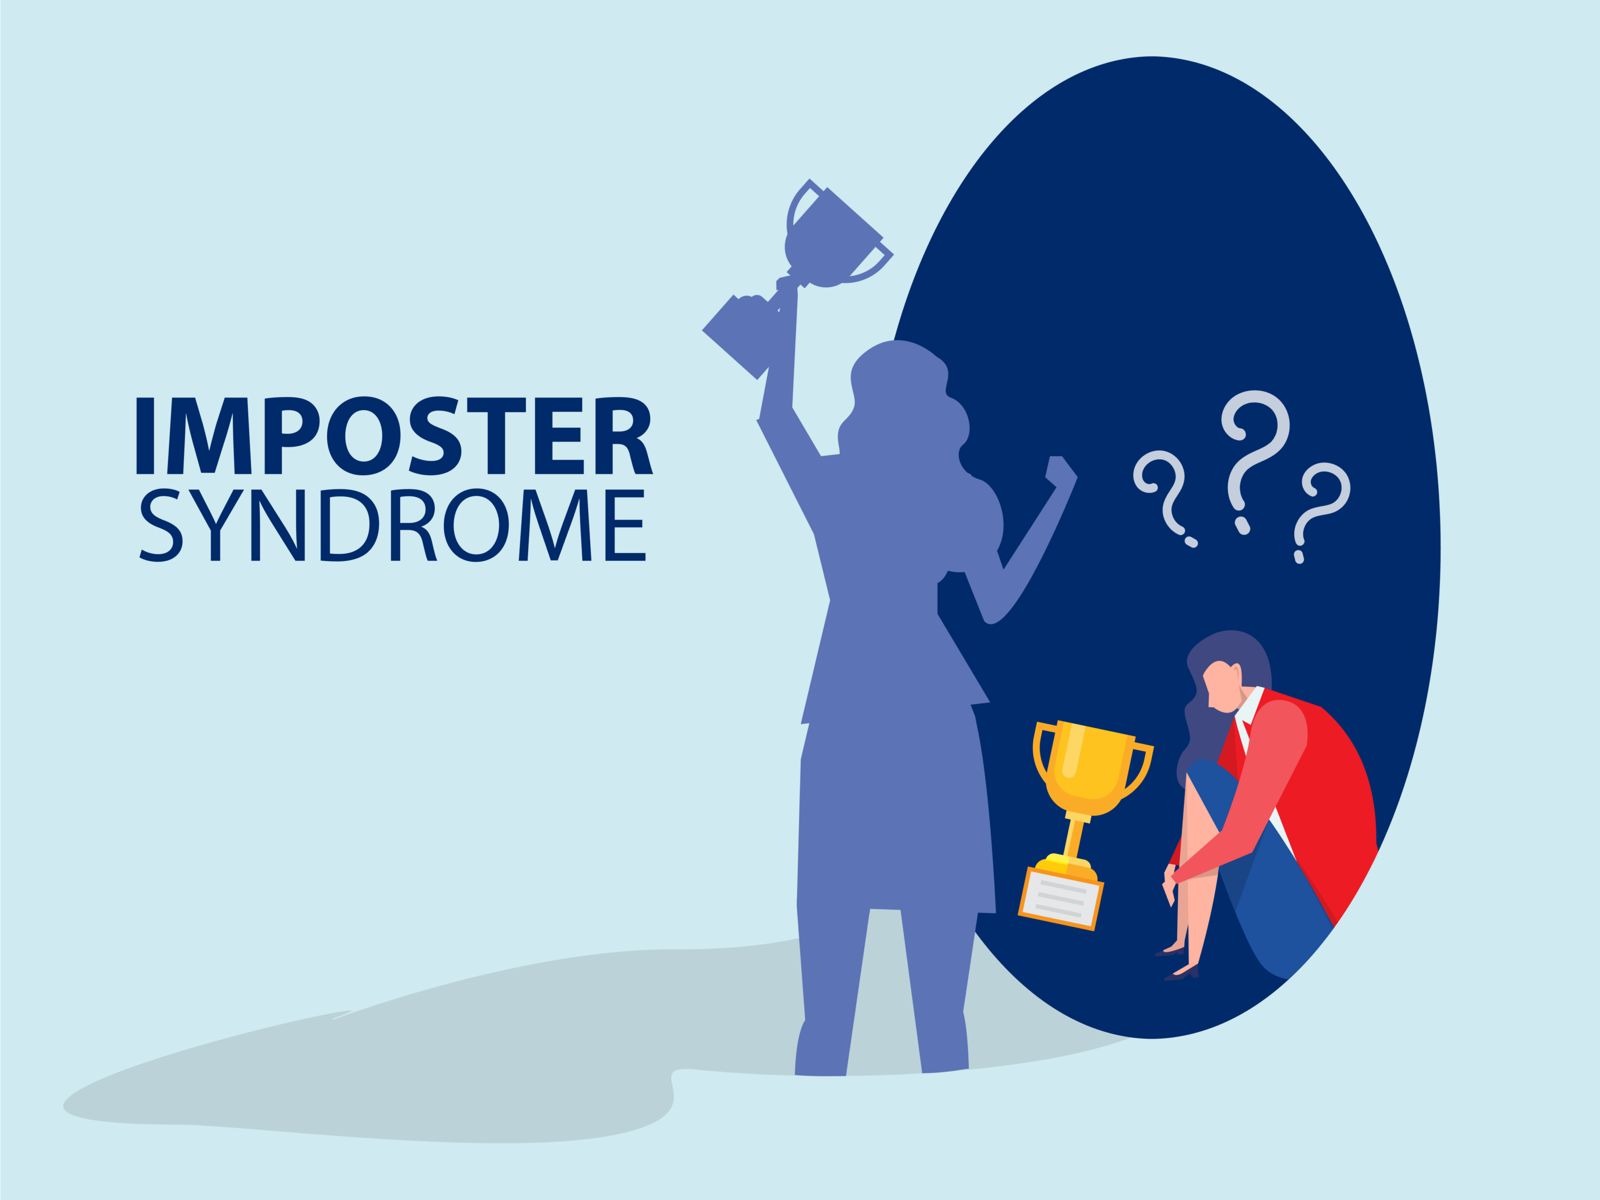 Imposter Syndrome: The Way Ahead